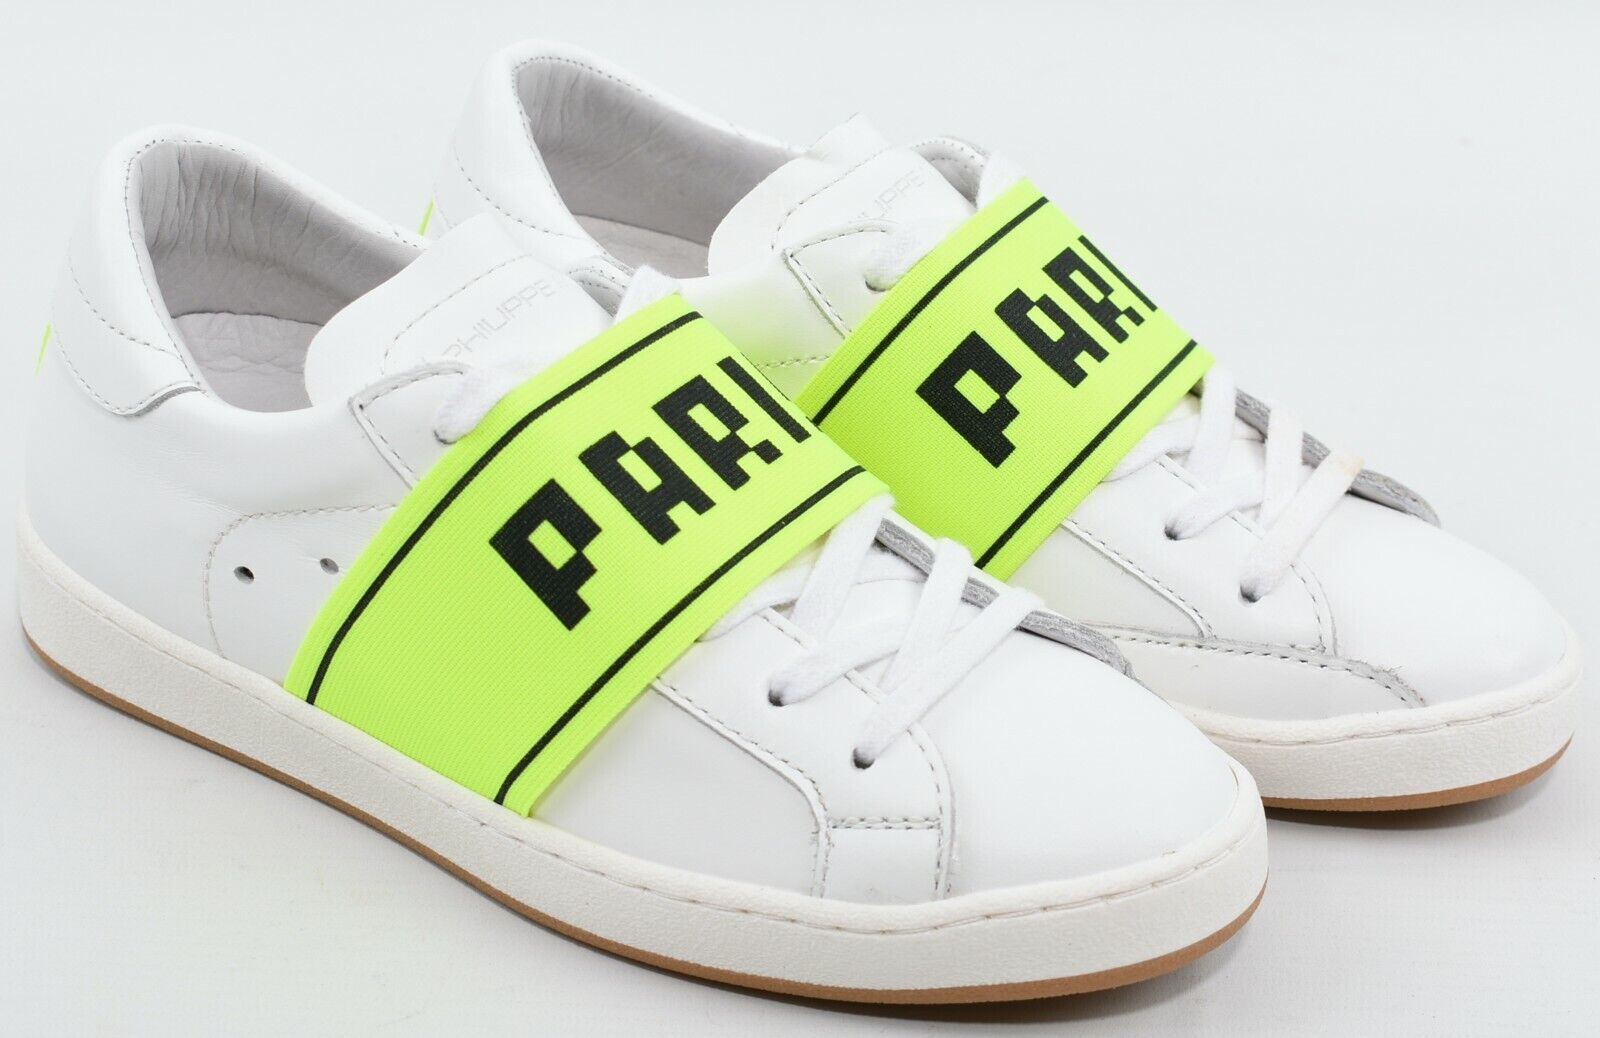 PHILIPPE MODEL Women's White/Neon Green Leather Trainers, Wedge Heel, size UK 3